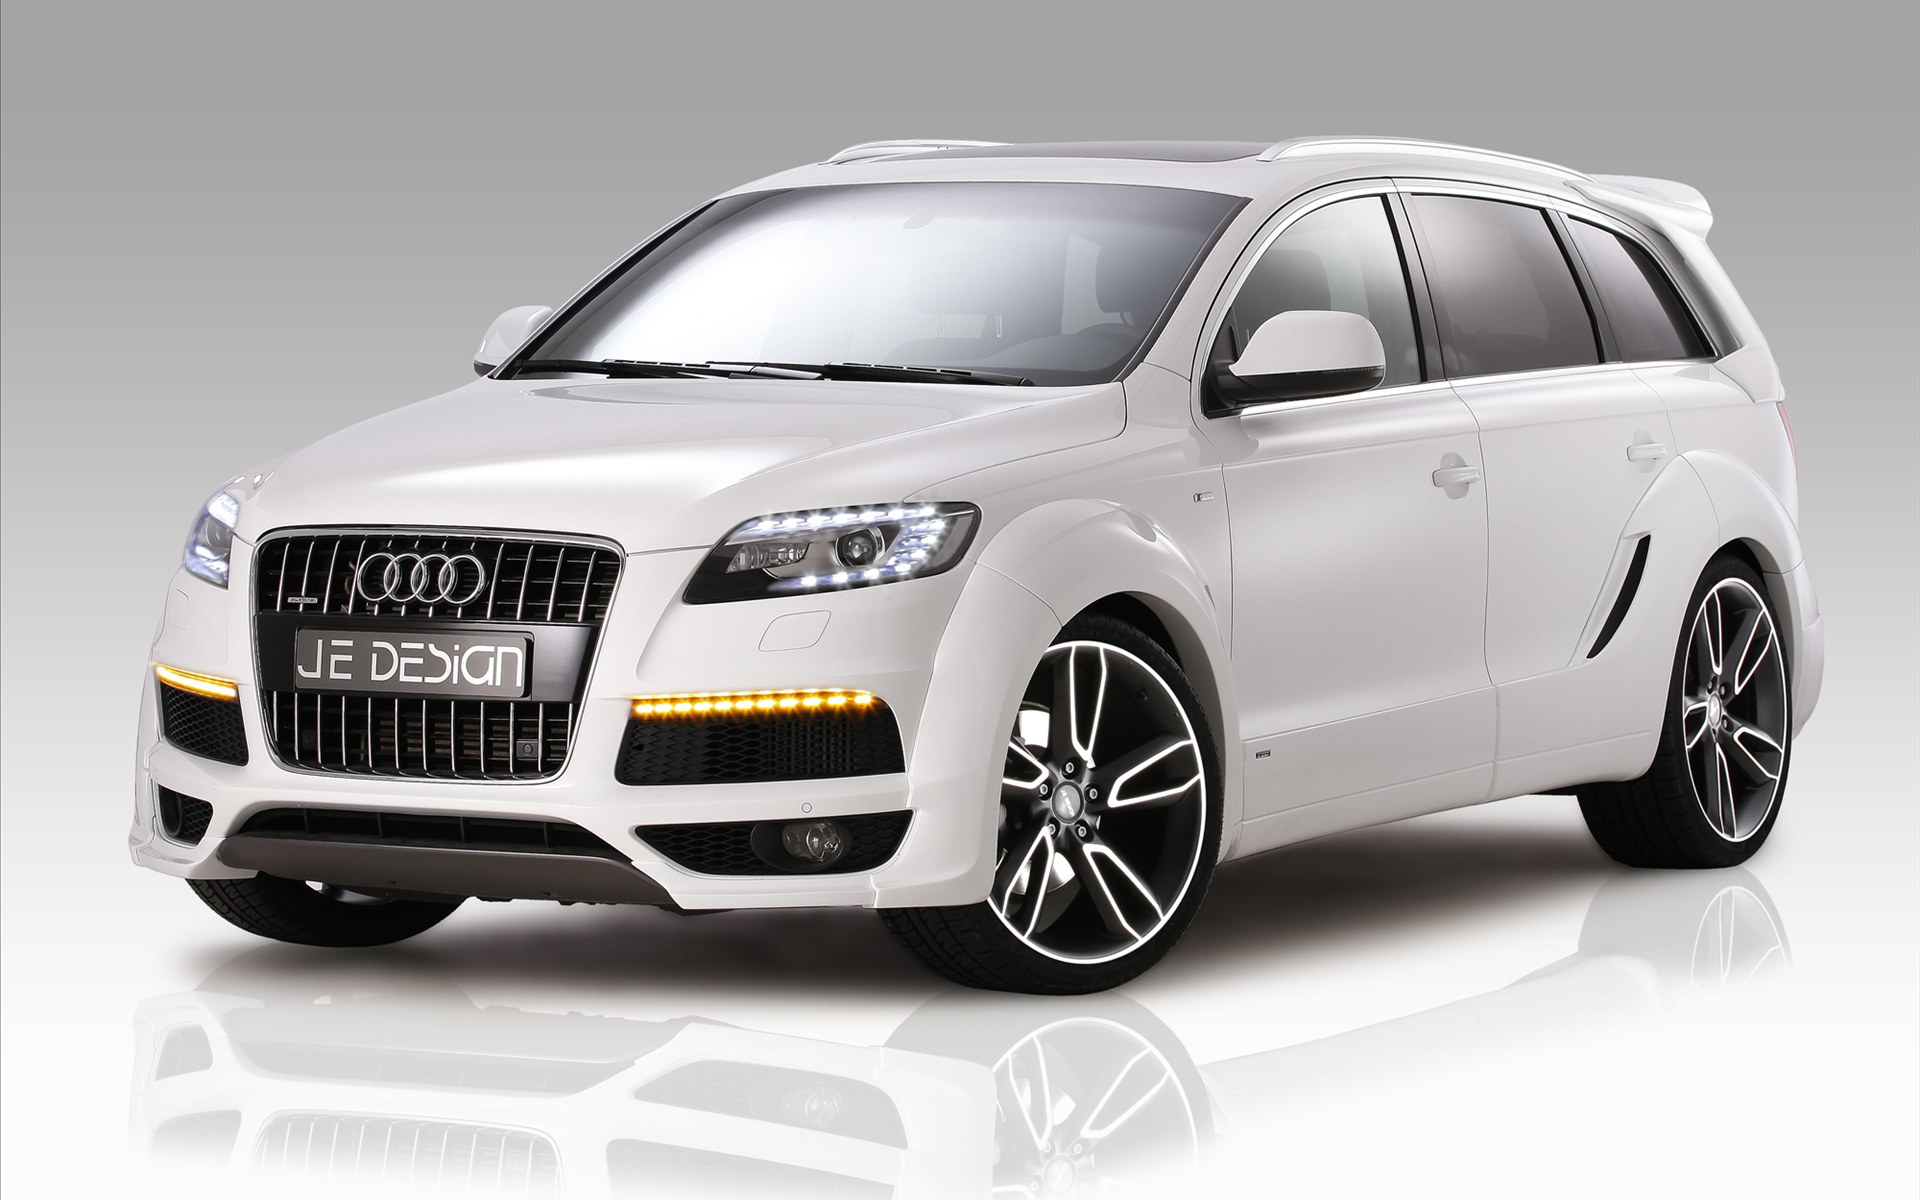 Wallpapers audi jeep white on the desktop